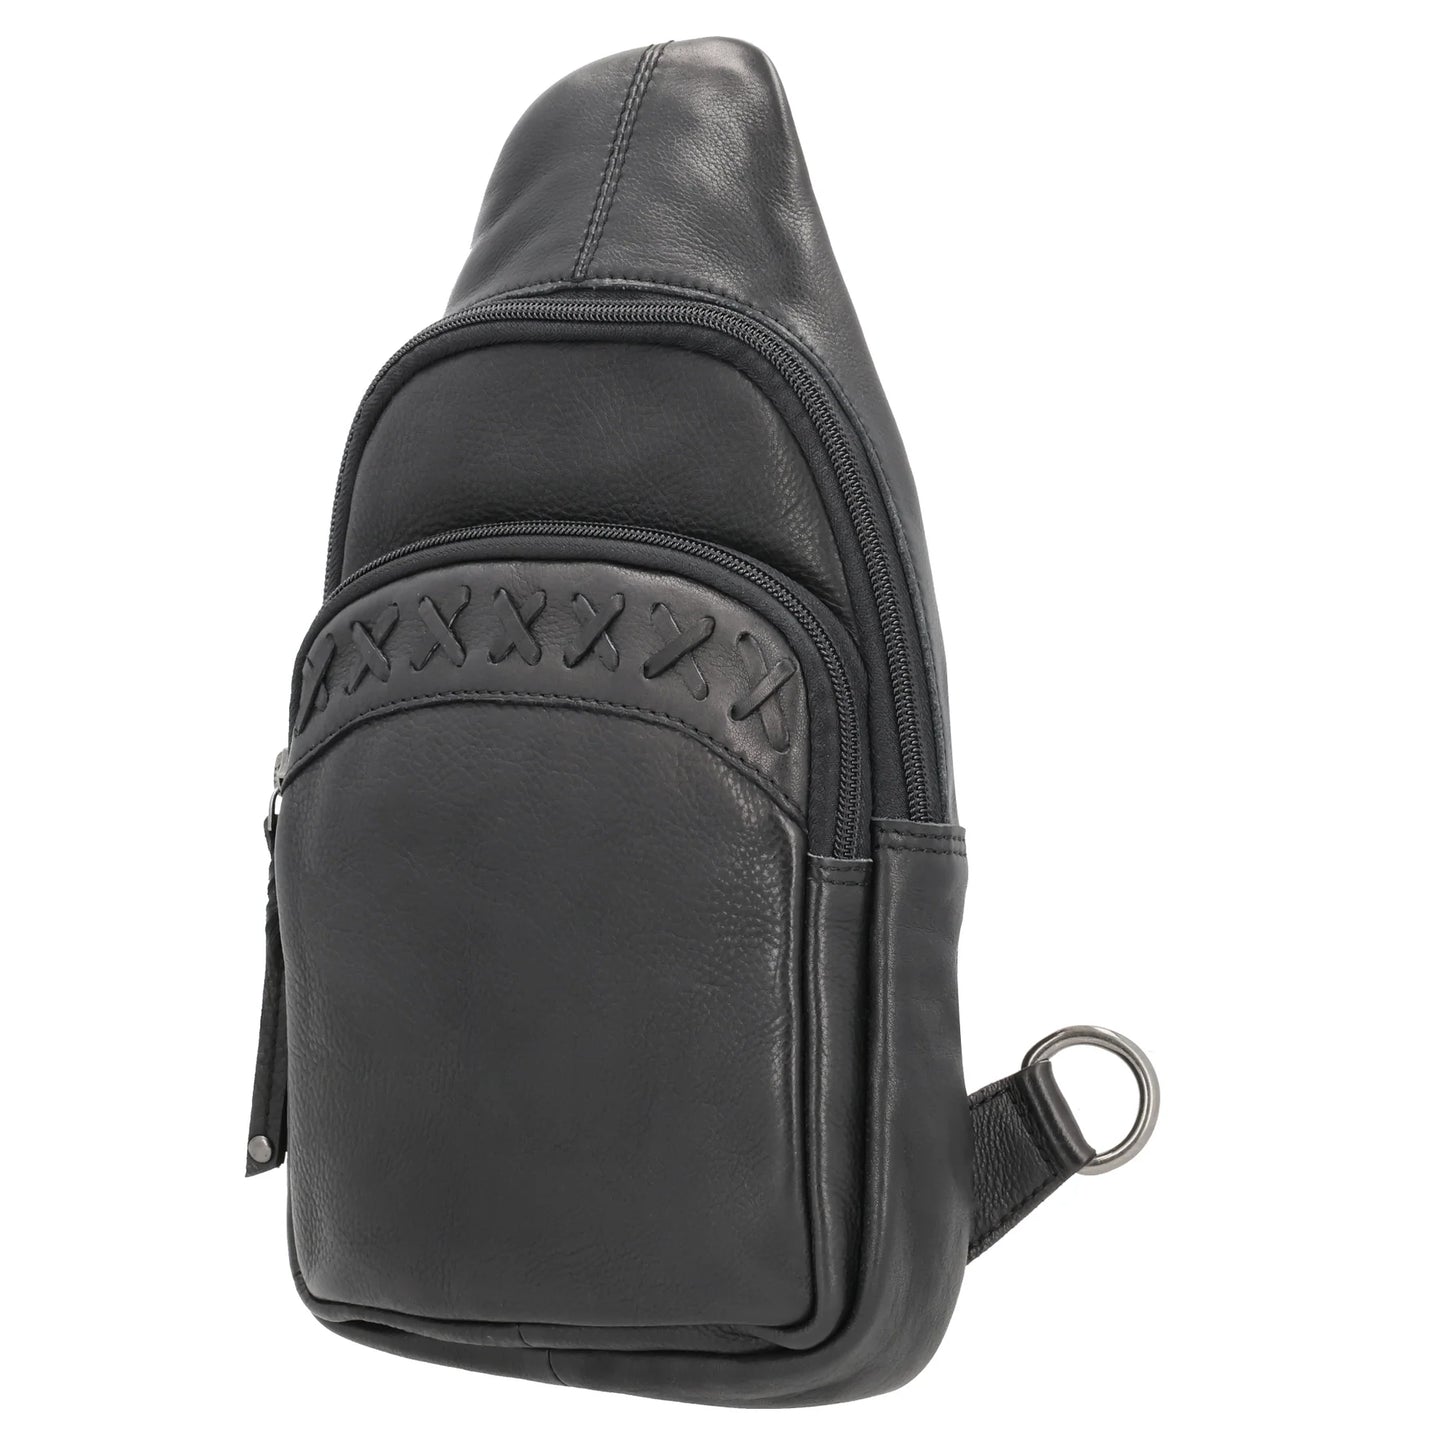 Taylor Leather Concealed Carry Sling Backpack